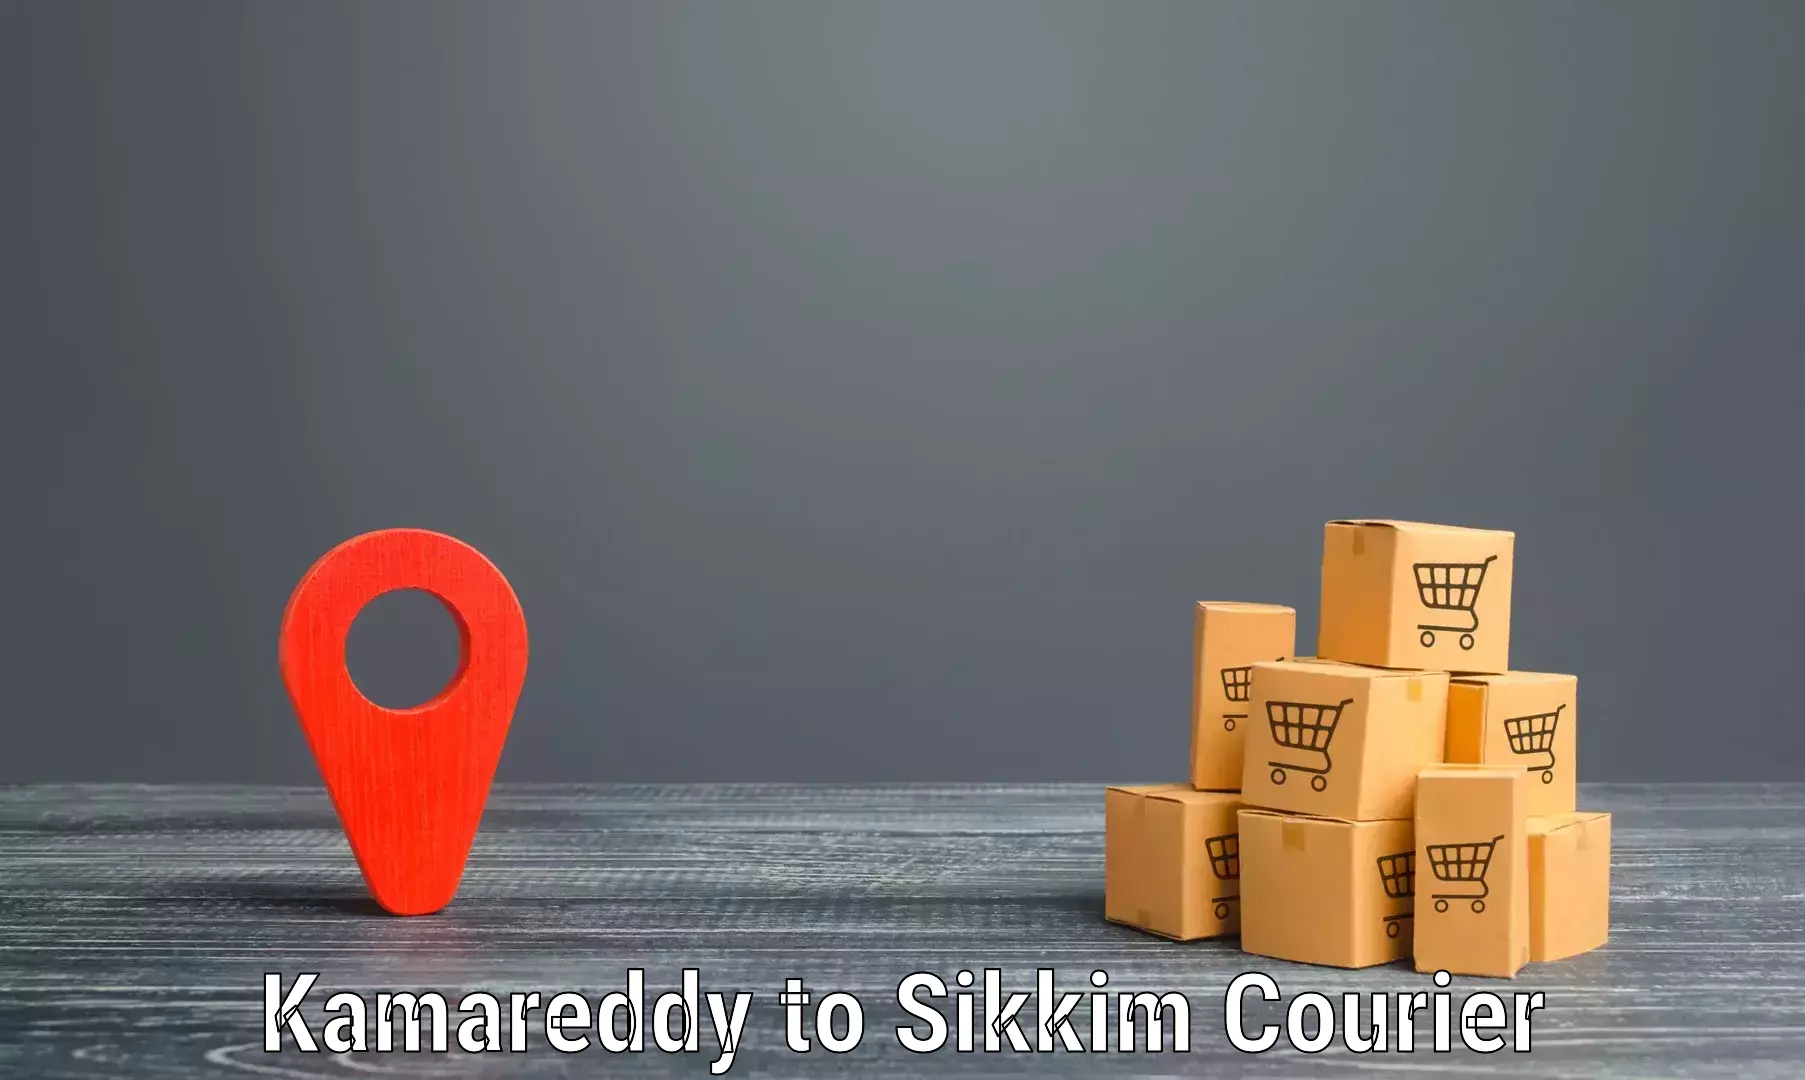 Remote area delivery Kamareddy to East Sikkim